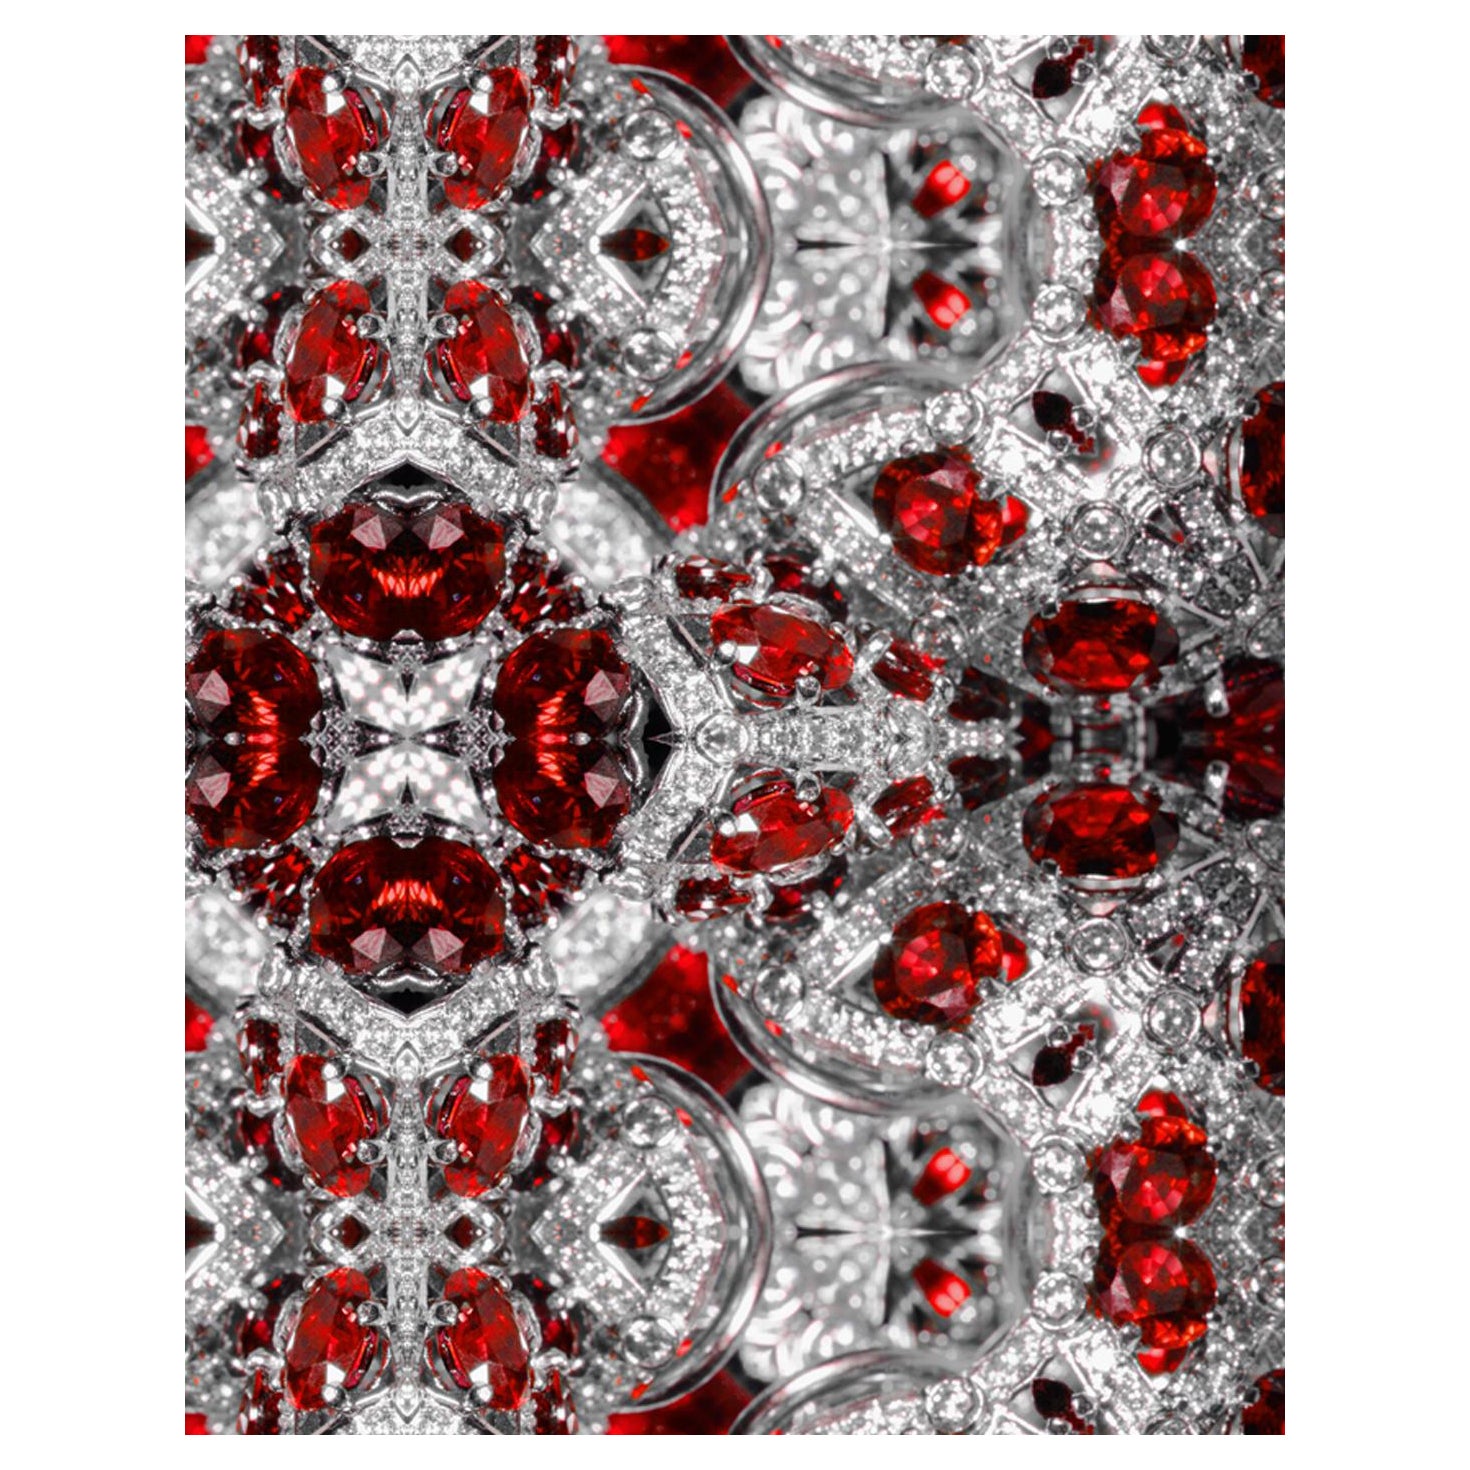  EDGE Collections Diamond Flower Series Ruby